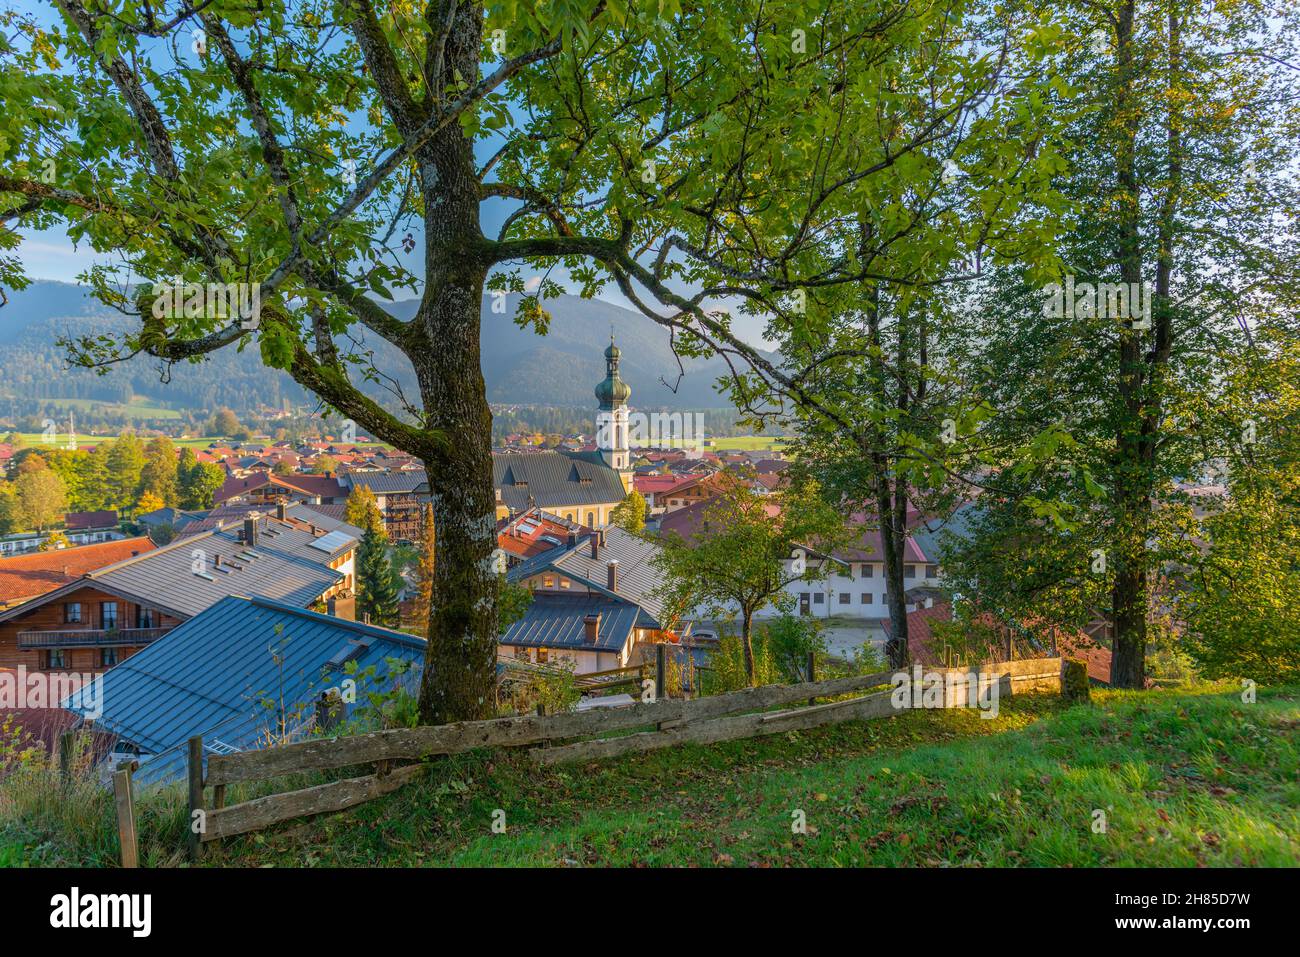 View over the popular and touristic climatic spa village Reit im Winkl, Chiemgau region, Upper Bavaria, Southern Germany, Europe Stock Photo